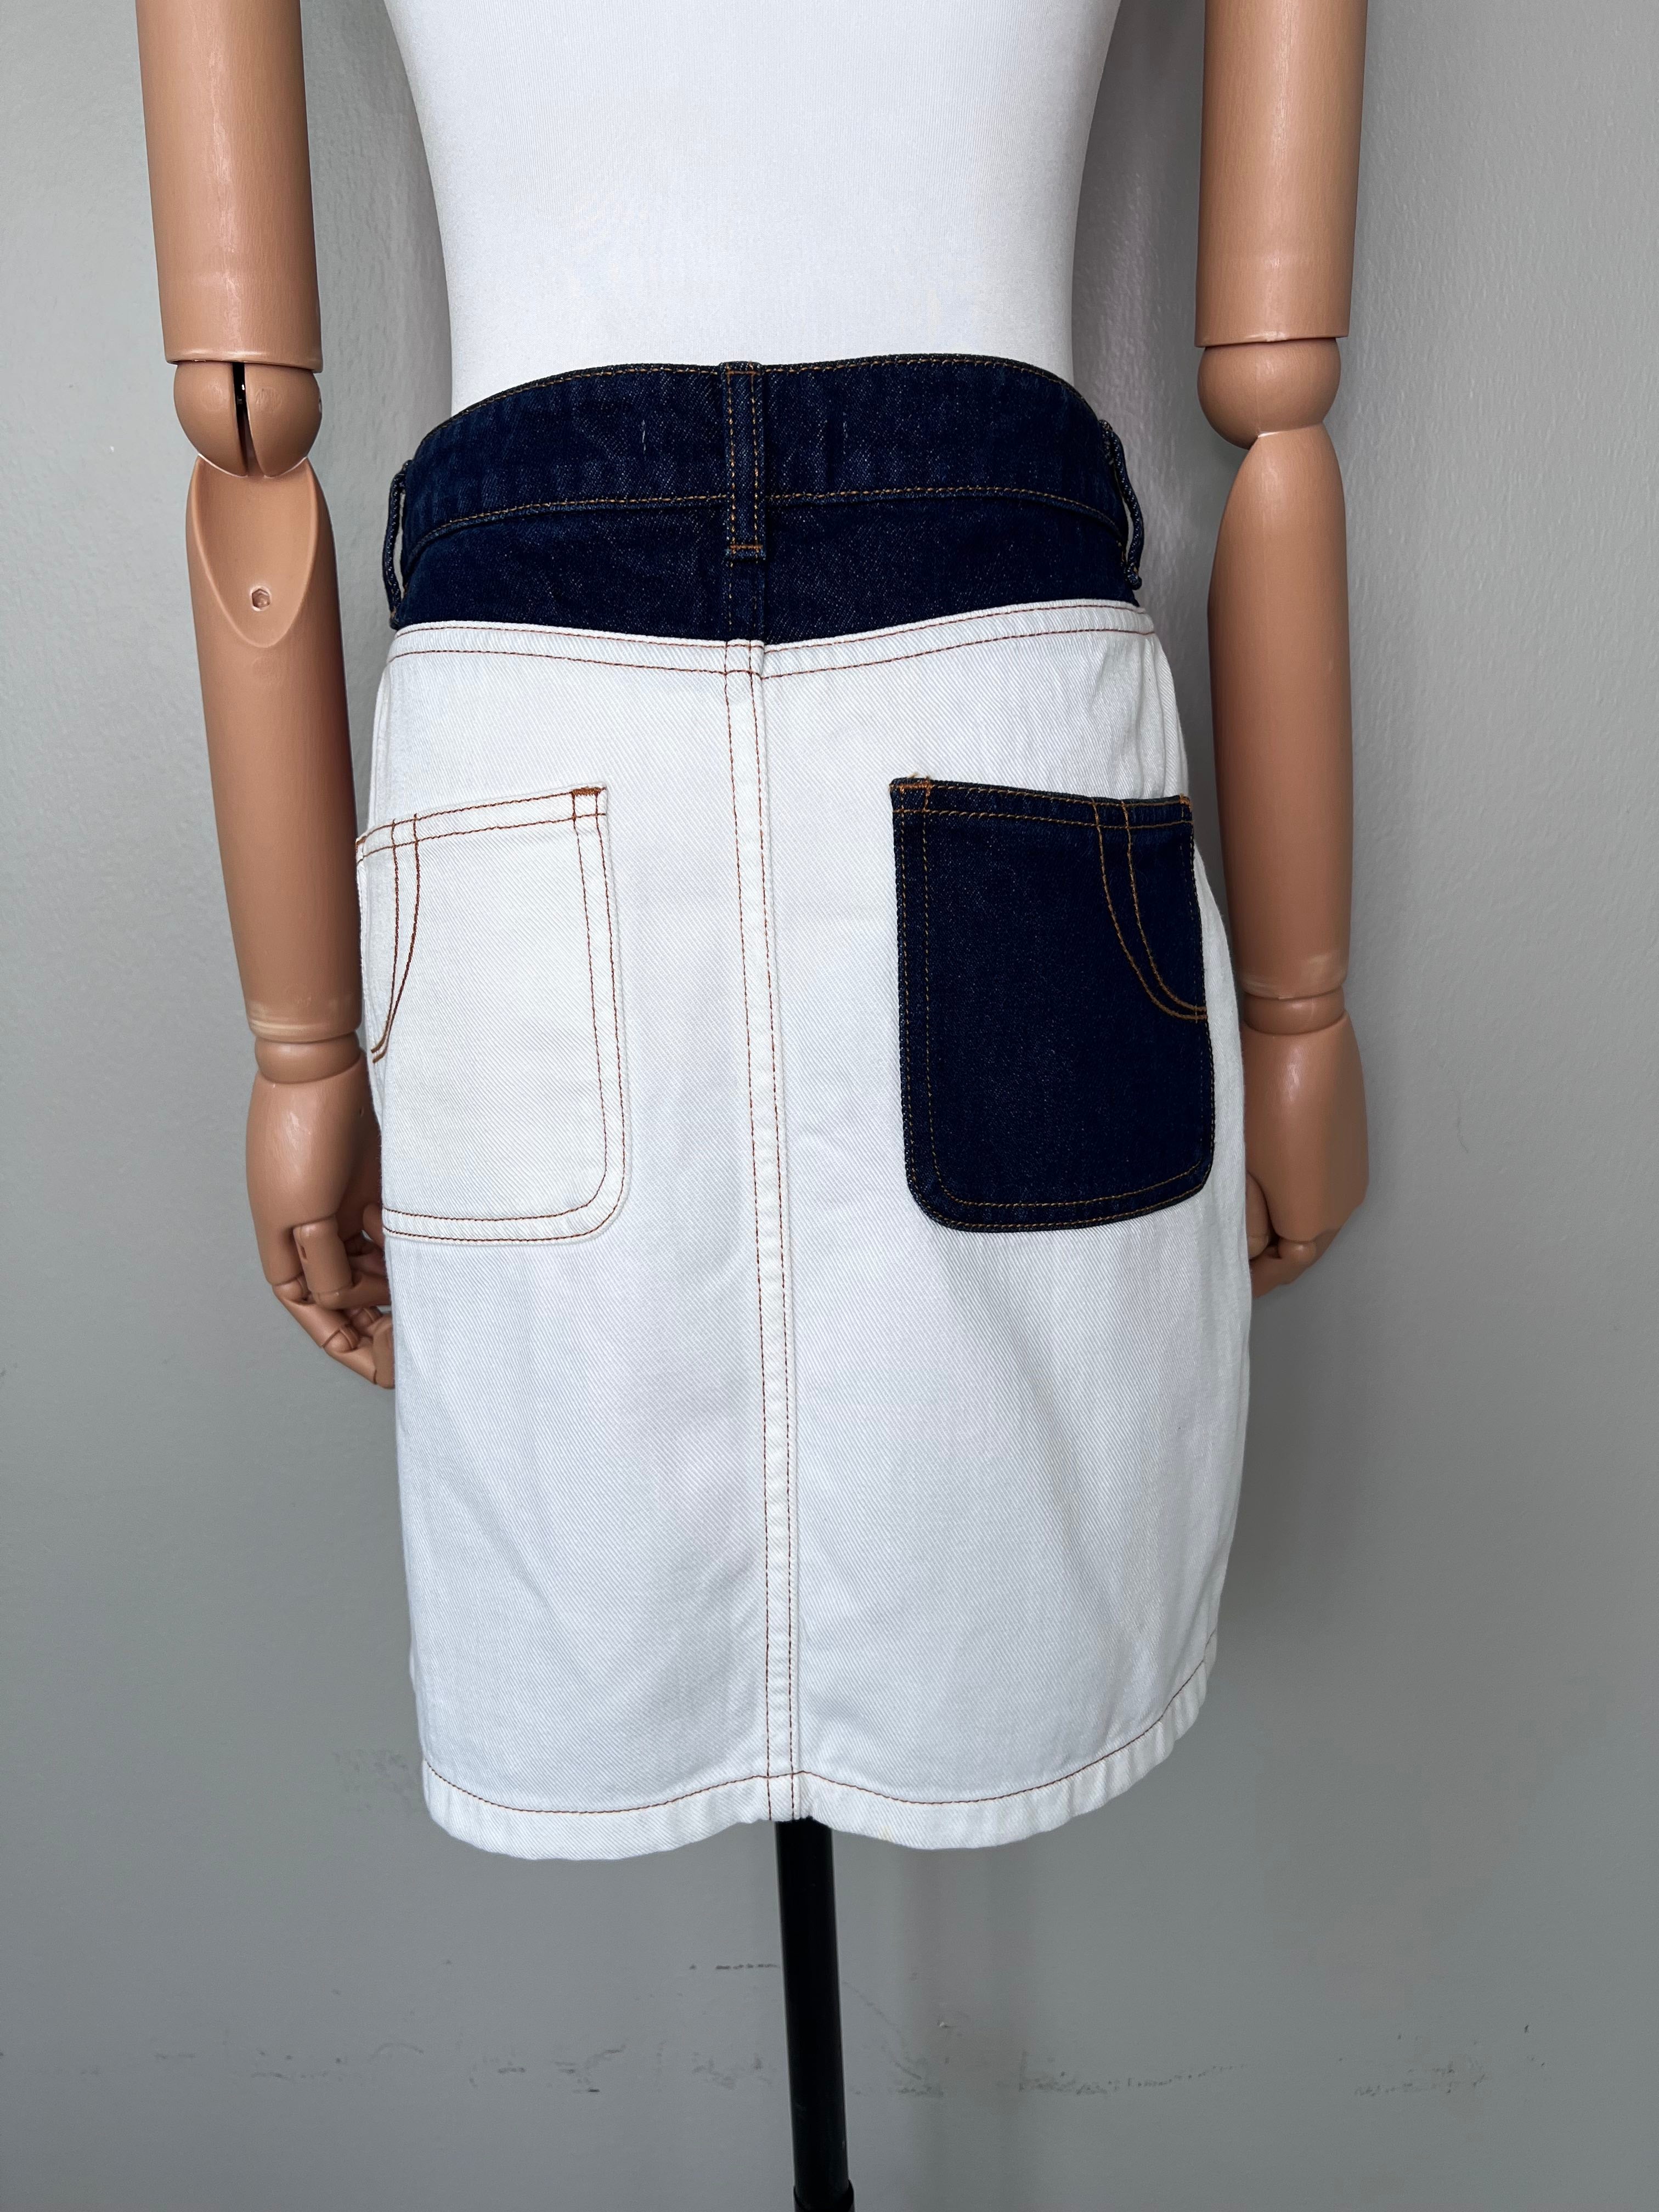 Mini multicolored denim skirt with blue denim waistband, one green pocket, pink denim across the top part, and blue denim on the back pocket. - MAJE